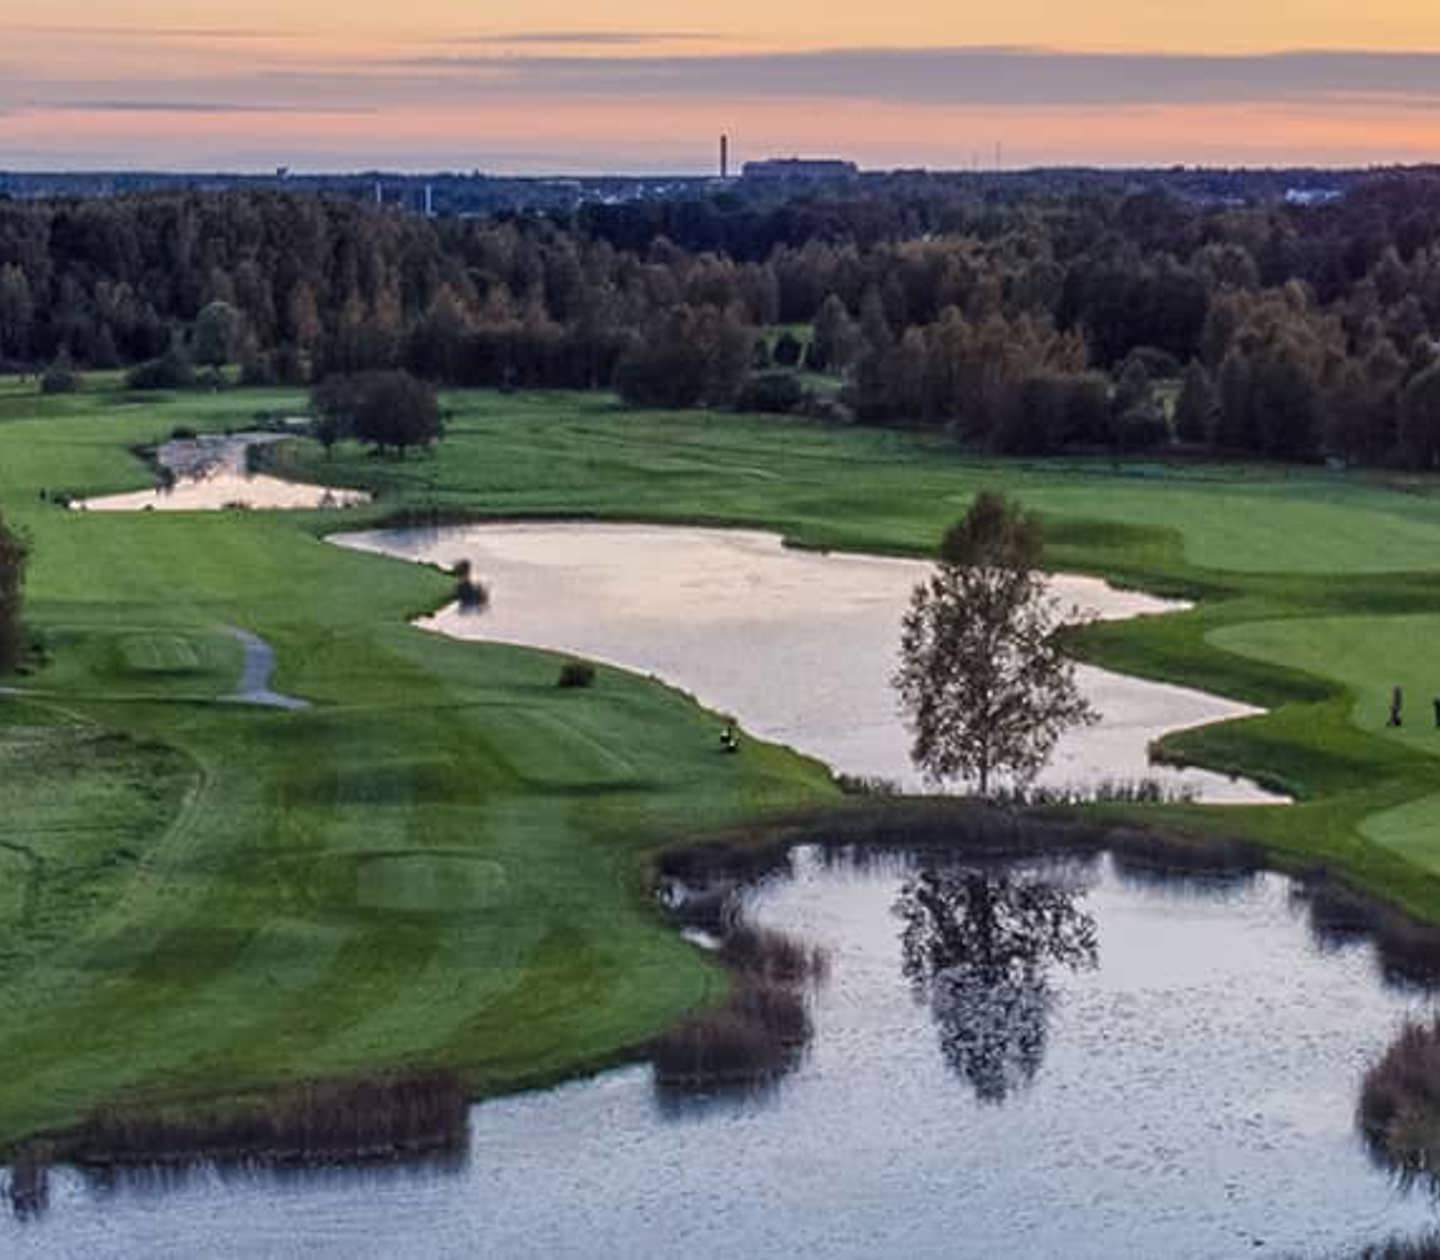 Golf course in evening light